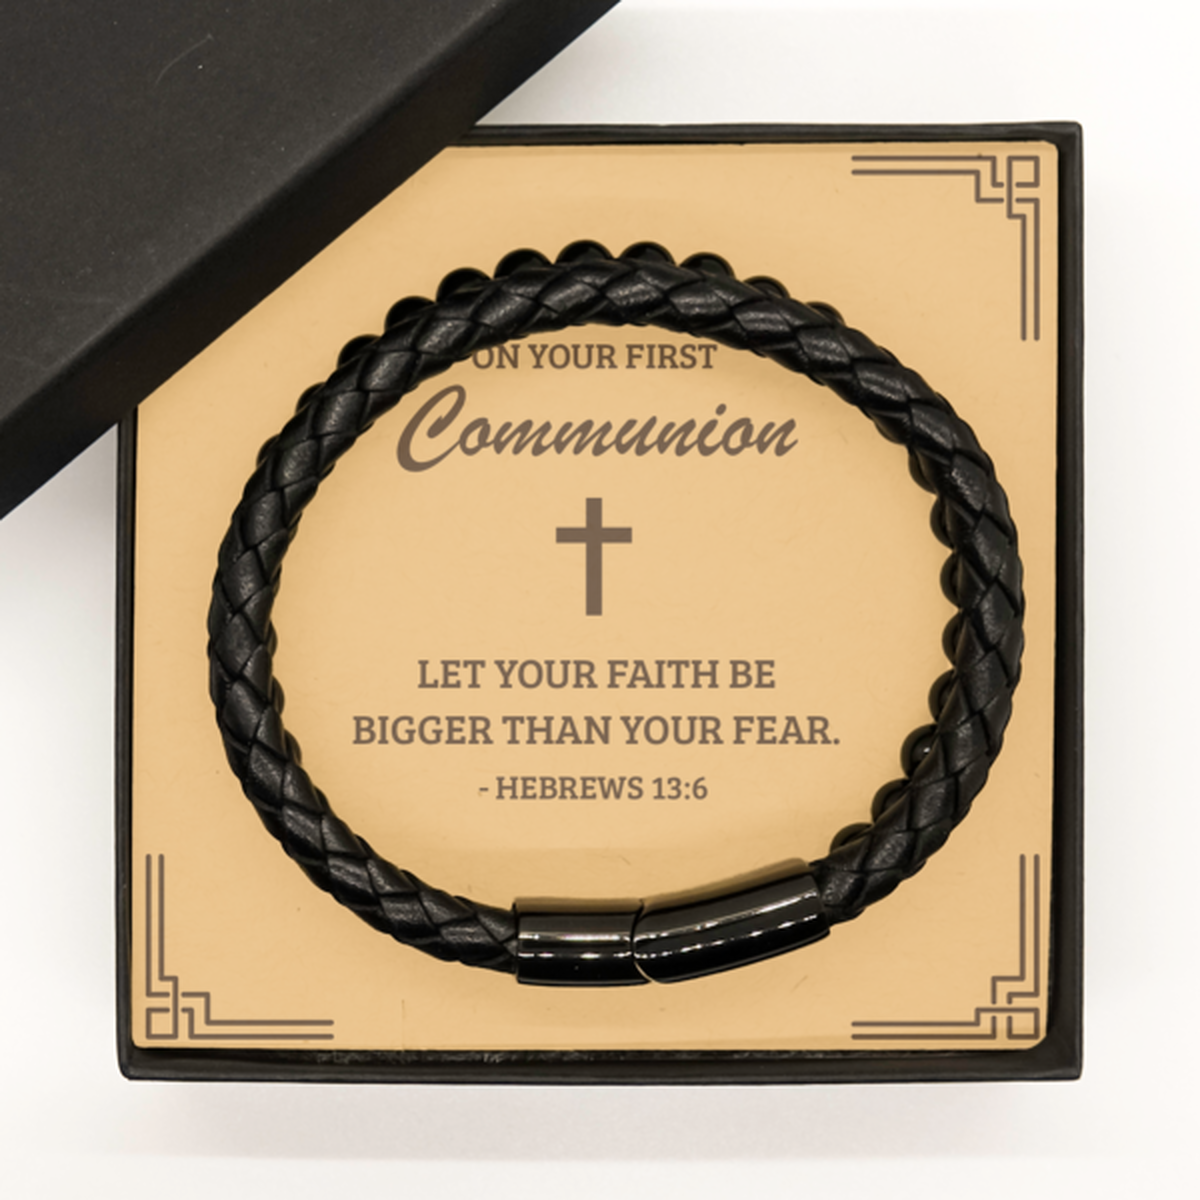 First Communion Gifts for Teenage Boys, Let your faith be bigger than your fear, Stone Leather Bracelet with Bible Verse Message Card, Religious Catholic Bracelet for Son, Grandson, Dad, Godfather